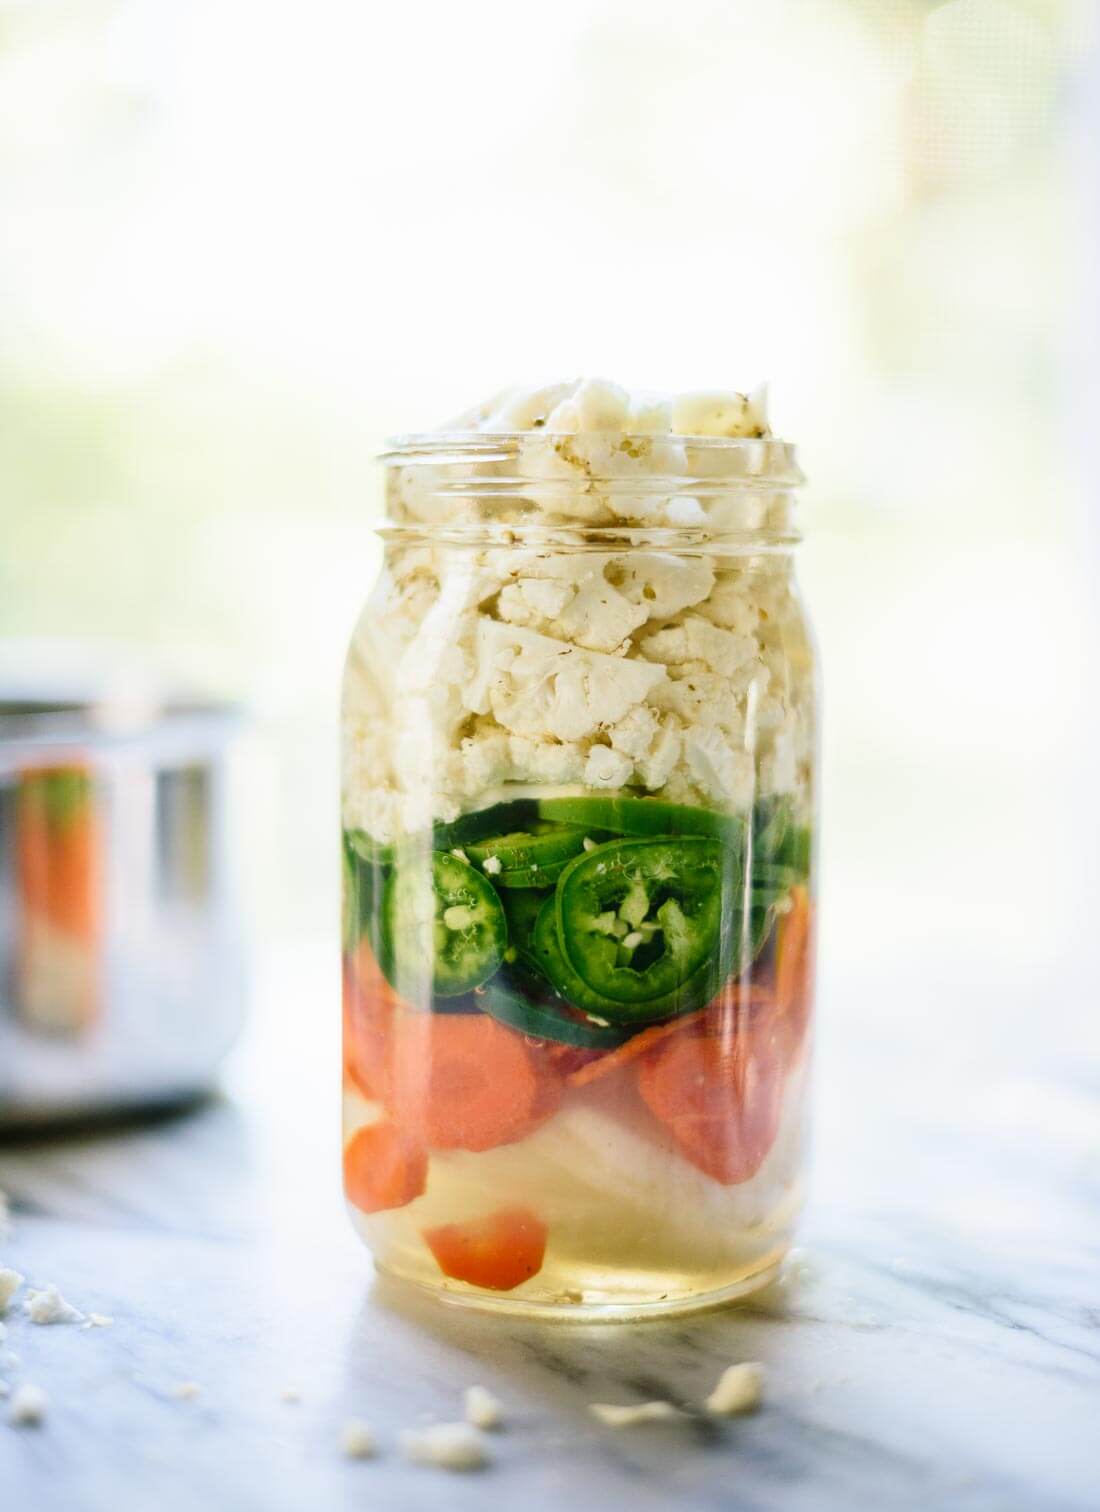 Learn how to make spicy quick-pickled vegetables! This recipe is easy to make. Pickled veggies are great on salads, sandwiches and other dishes. cookieandkate.com